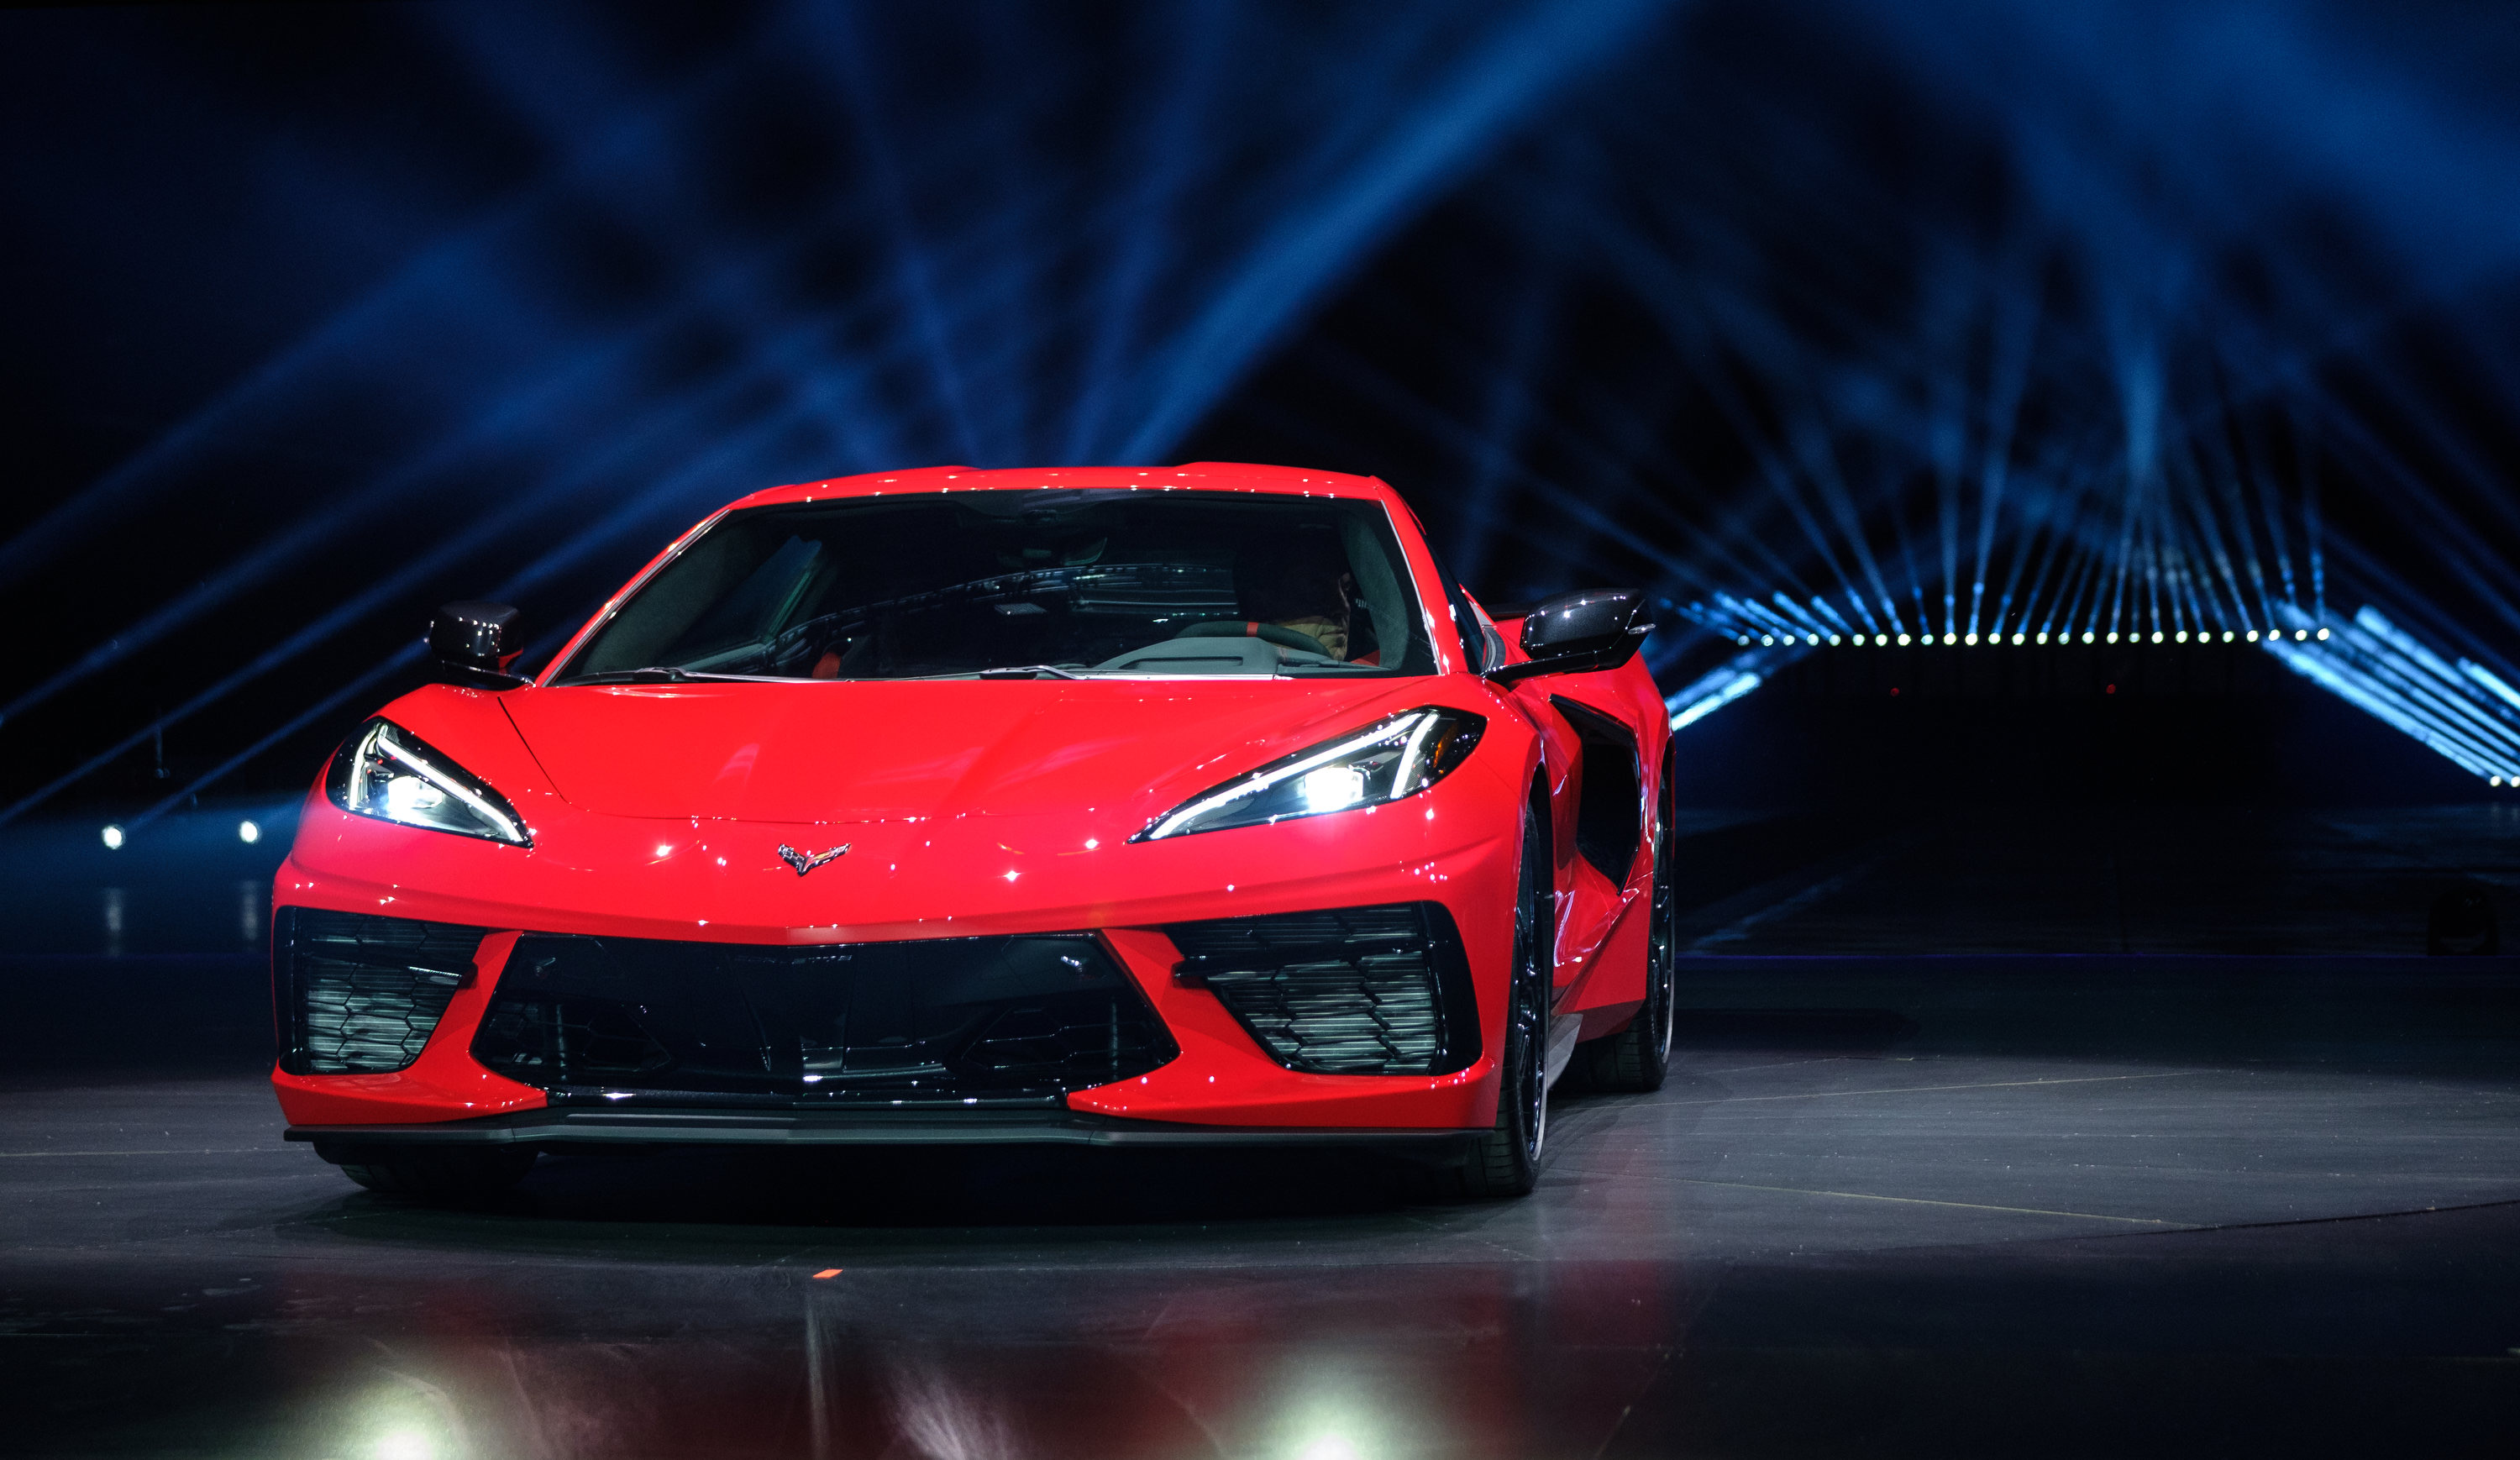 2020 Corvette, So, what do you think of the mid-engine Corvette?, ClassicCars.com Journal